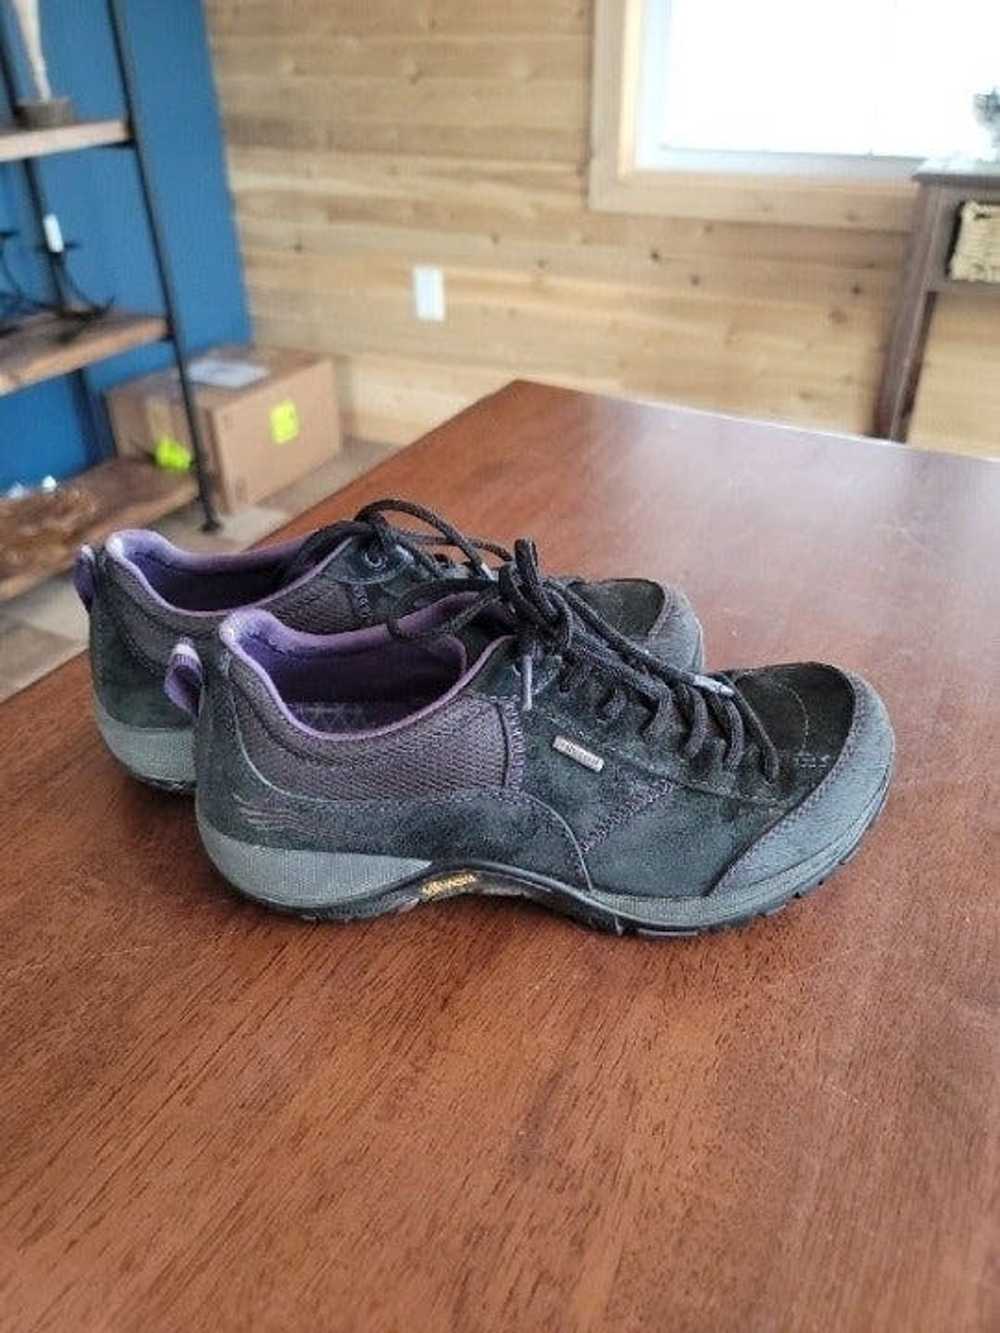 Other Women's Dansko Hiking Shoes Size 7.5-8 - image 1